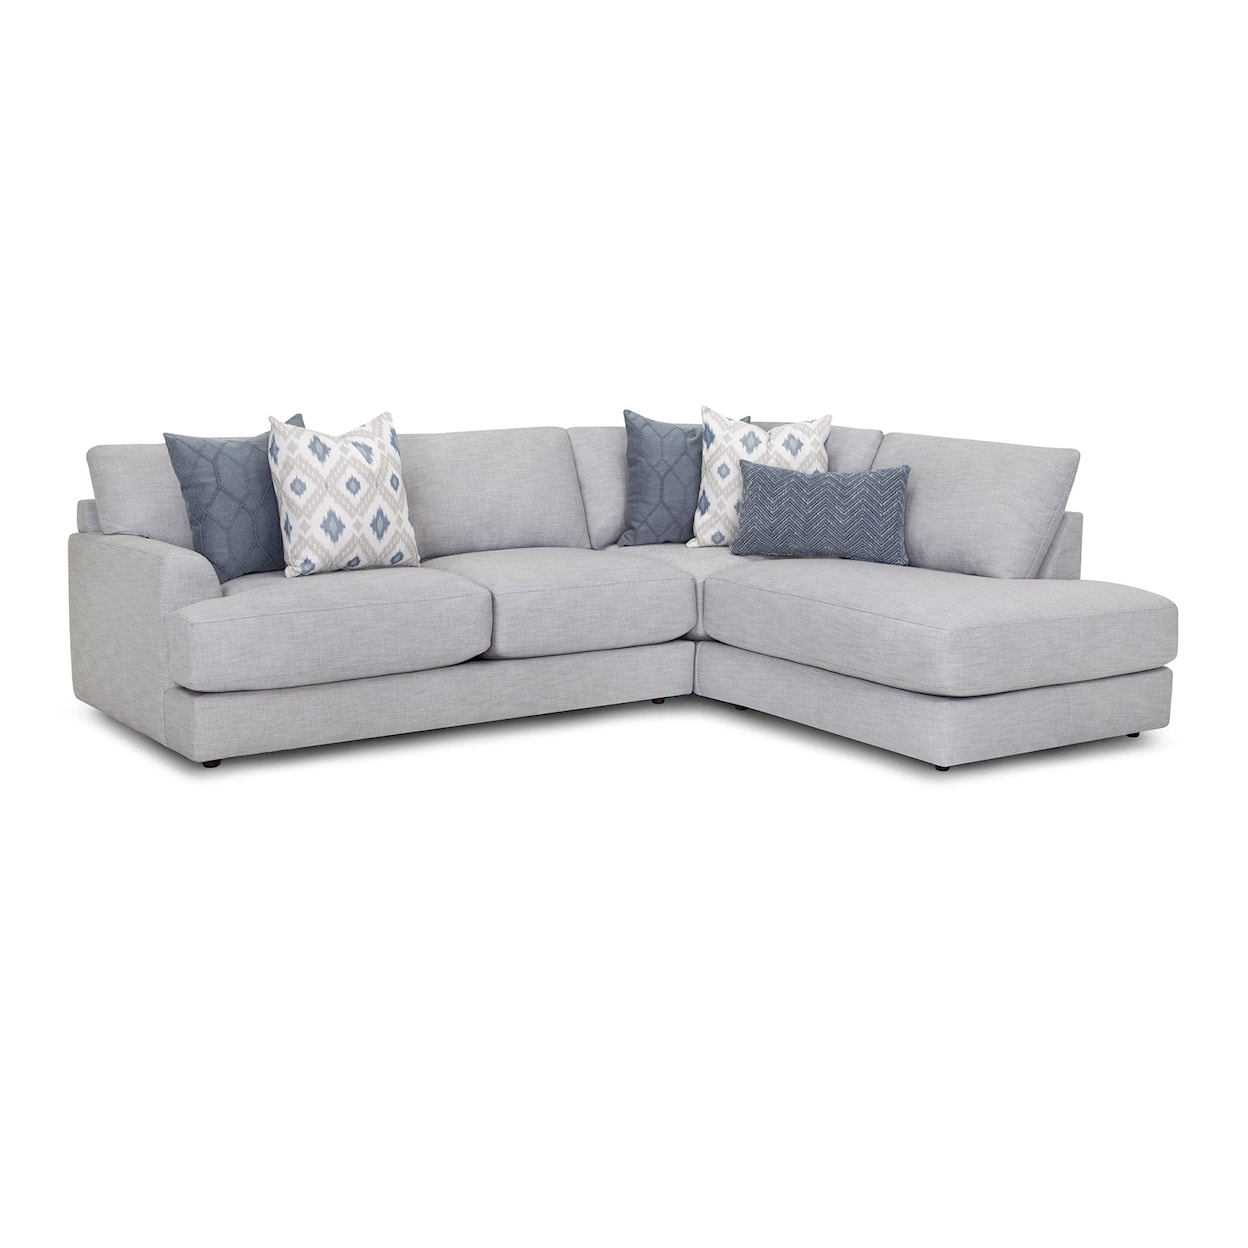 Franklin 900 Indy 2-Piece Sectional Sofa